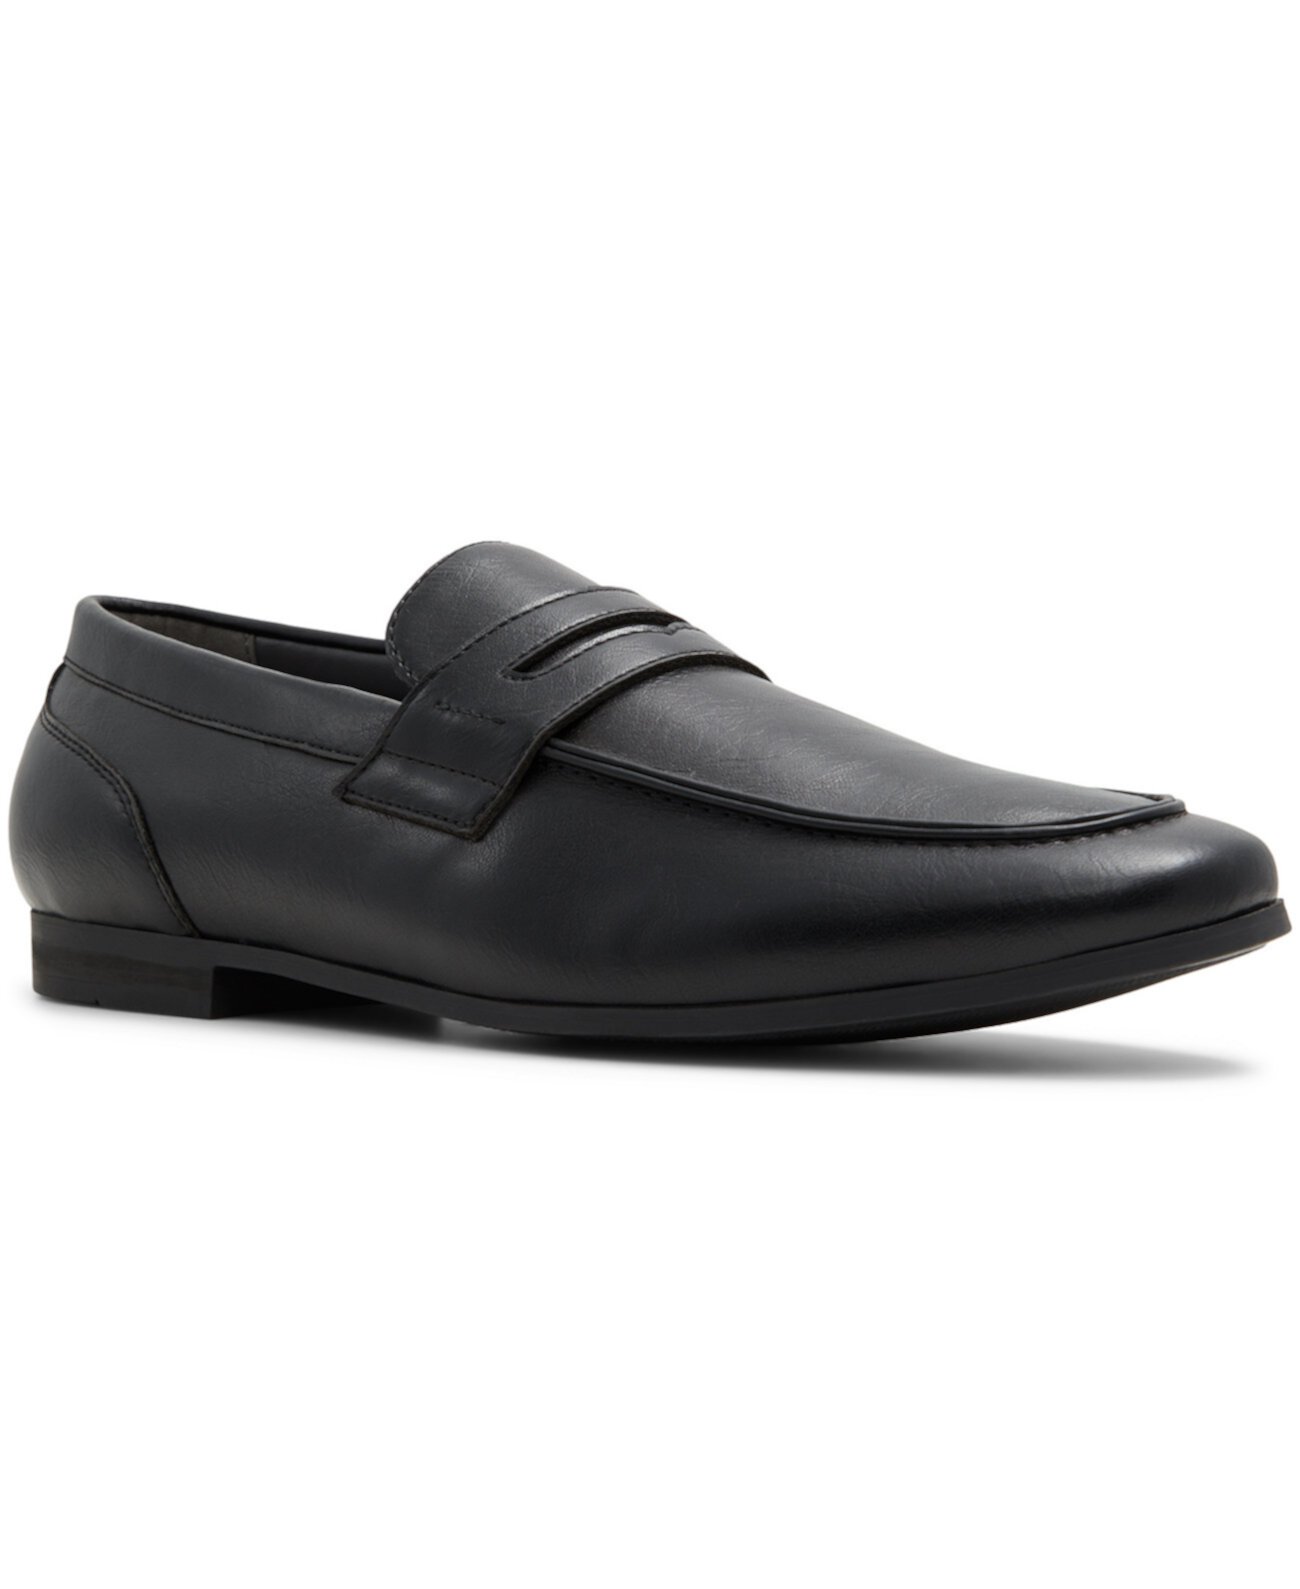 Men's Starling Driving Loafers Call It Spring